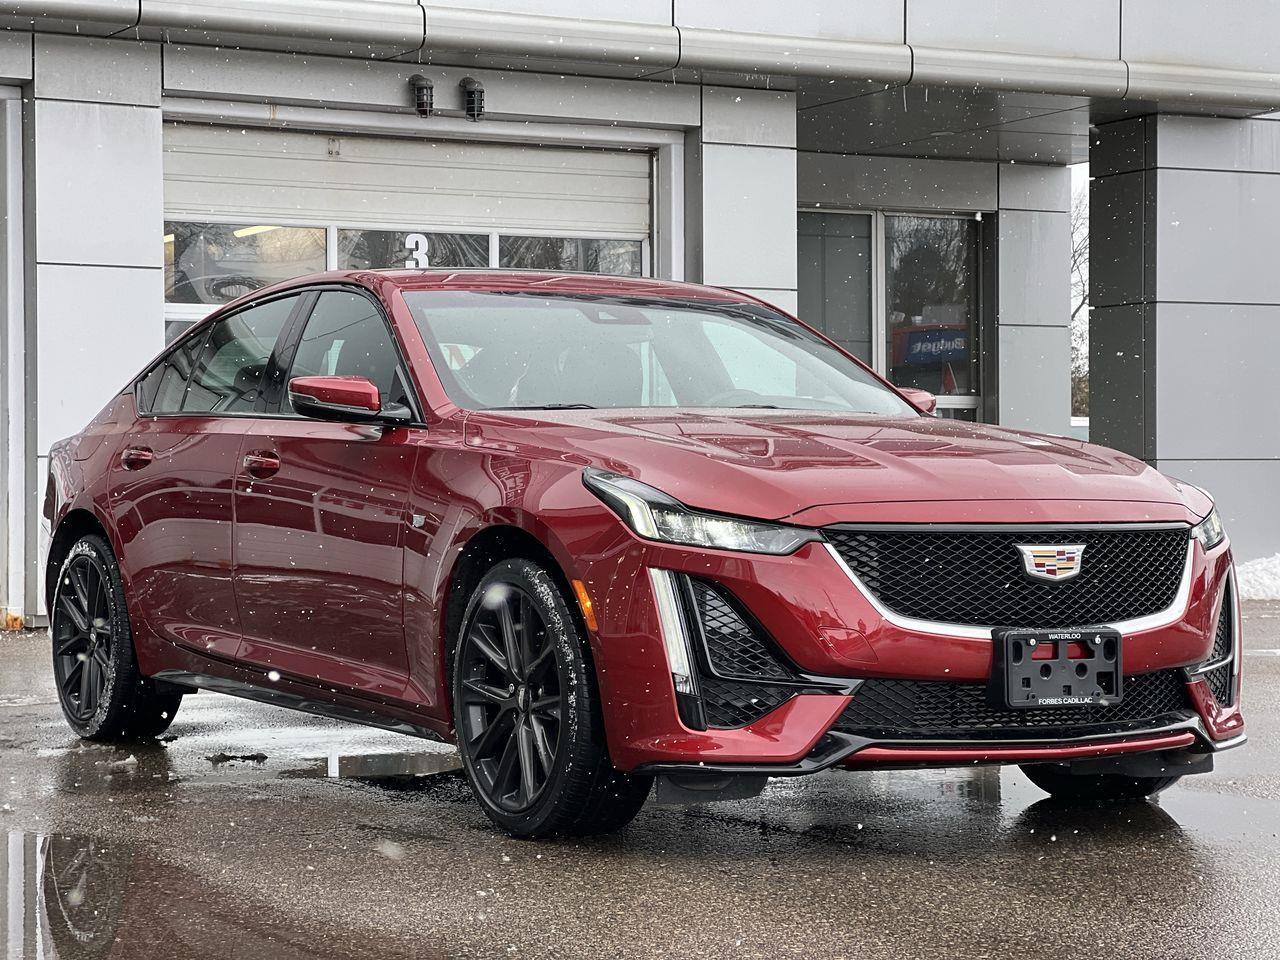 2020 Cadillac CT5 Sport BREMBOS, SUNROOF, HEATED/COOLED SEATS, BOSE 